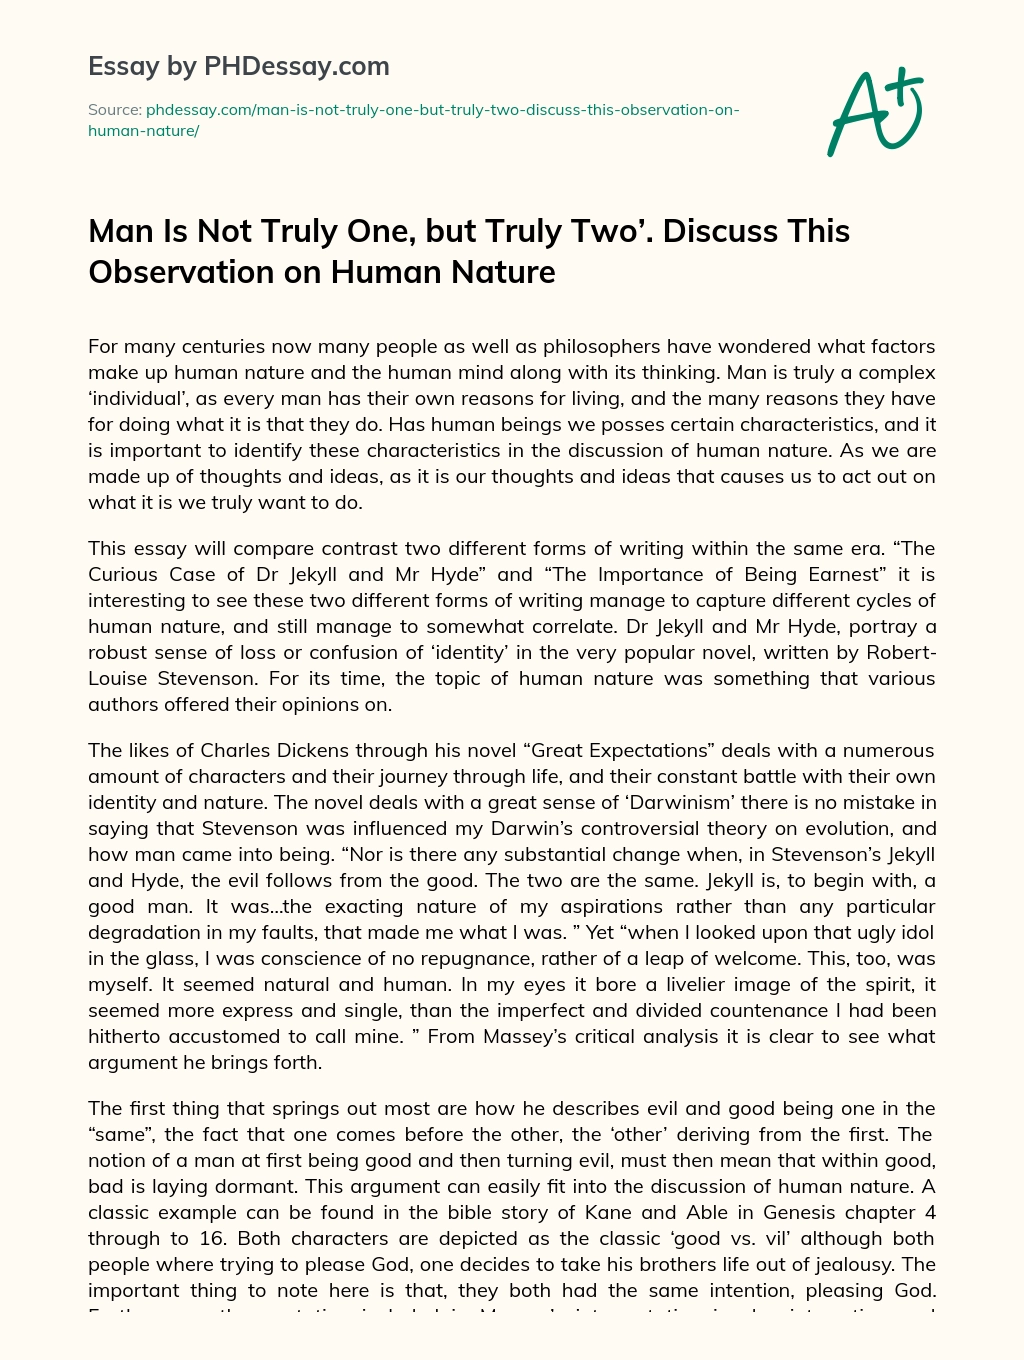 Man Is Not Truly One, but Truly Two essay